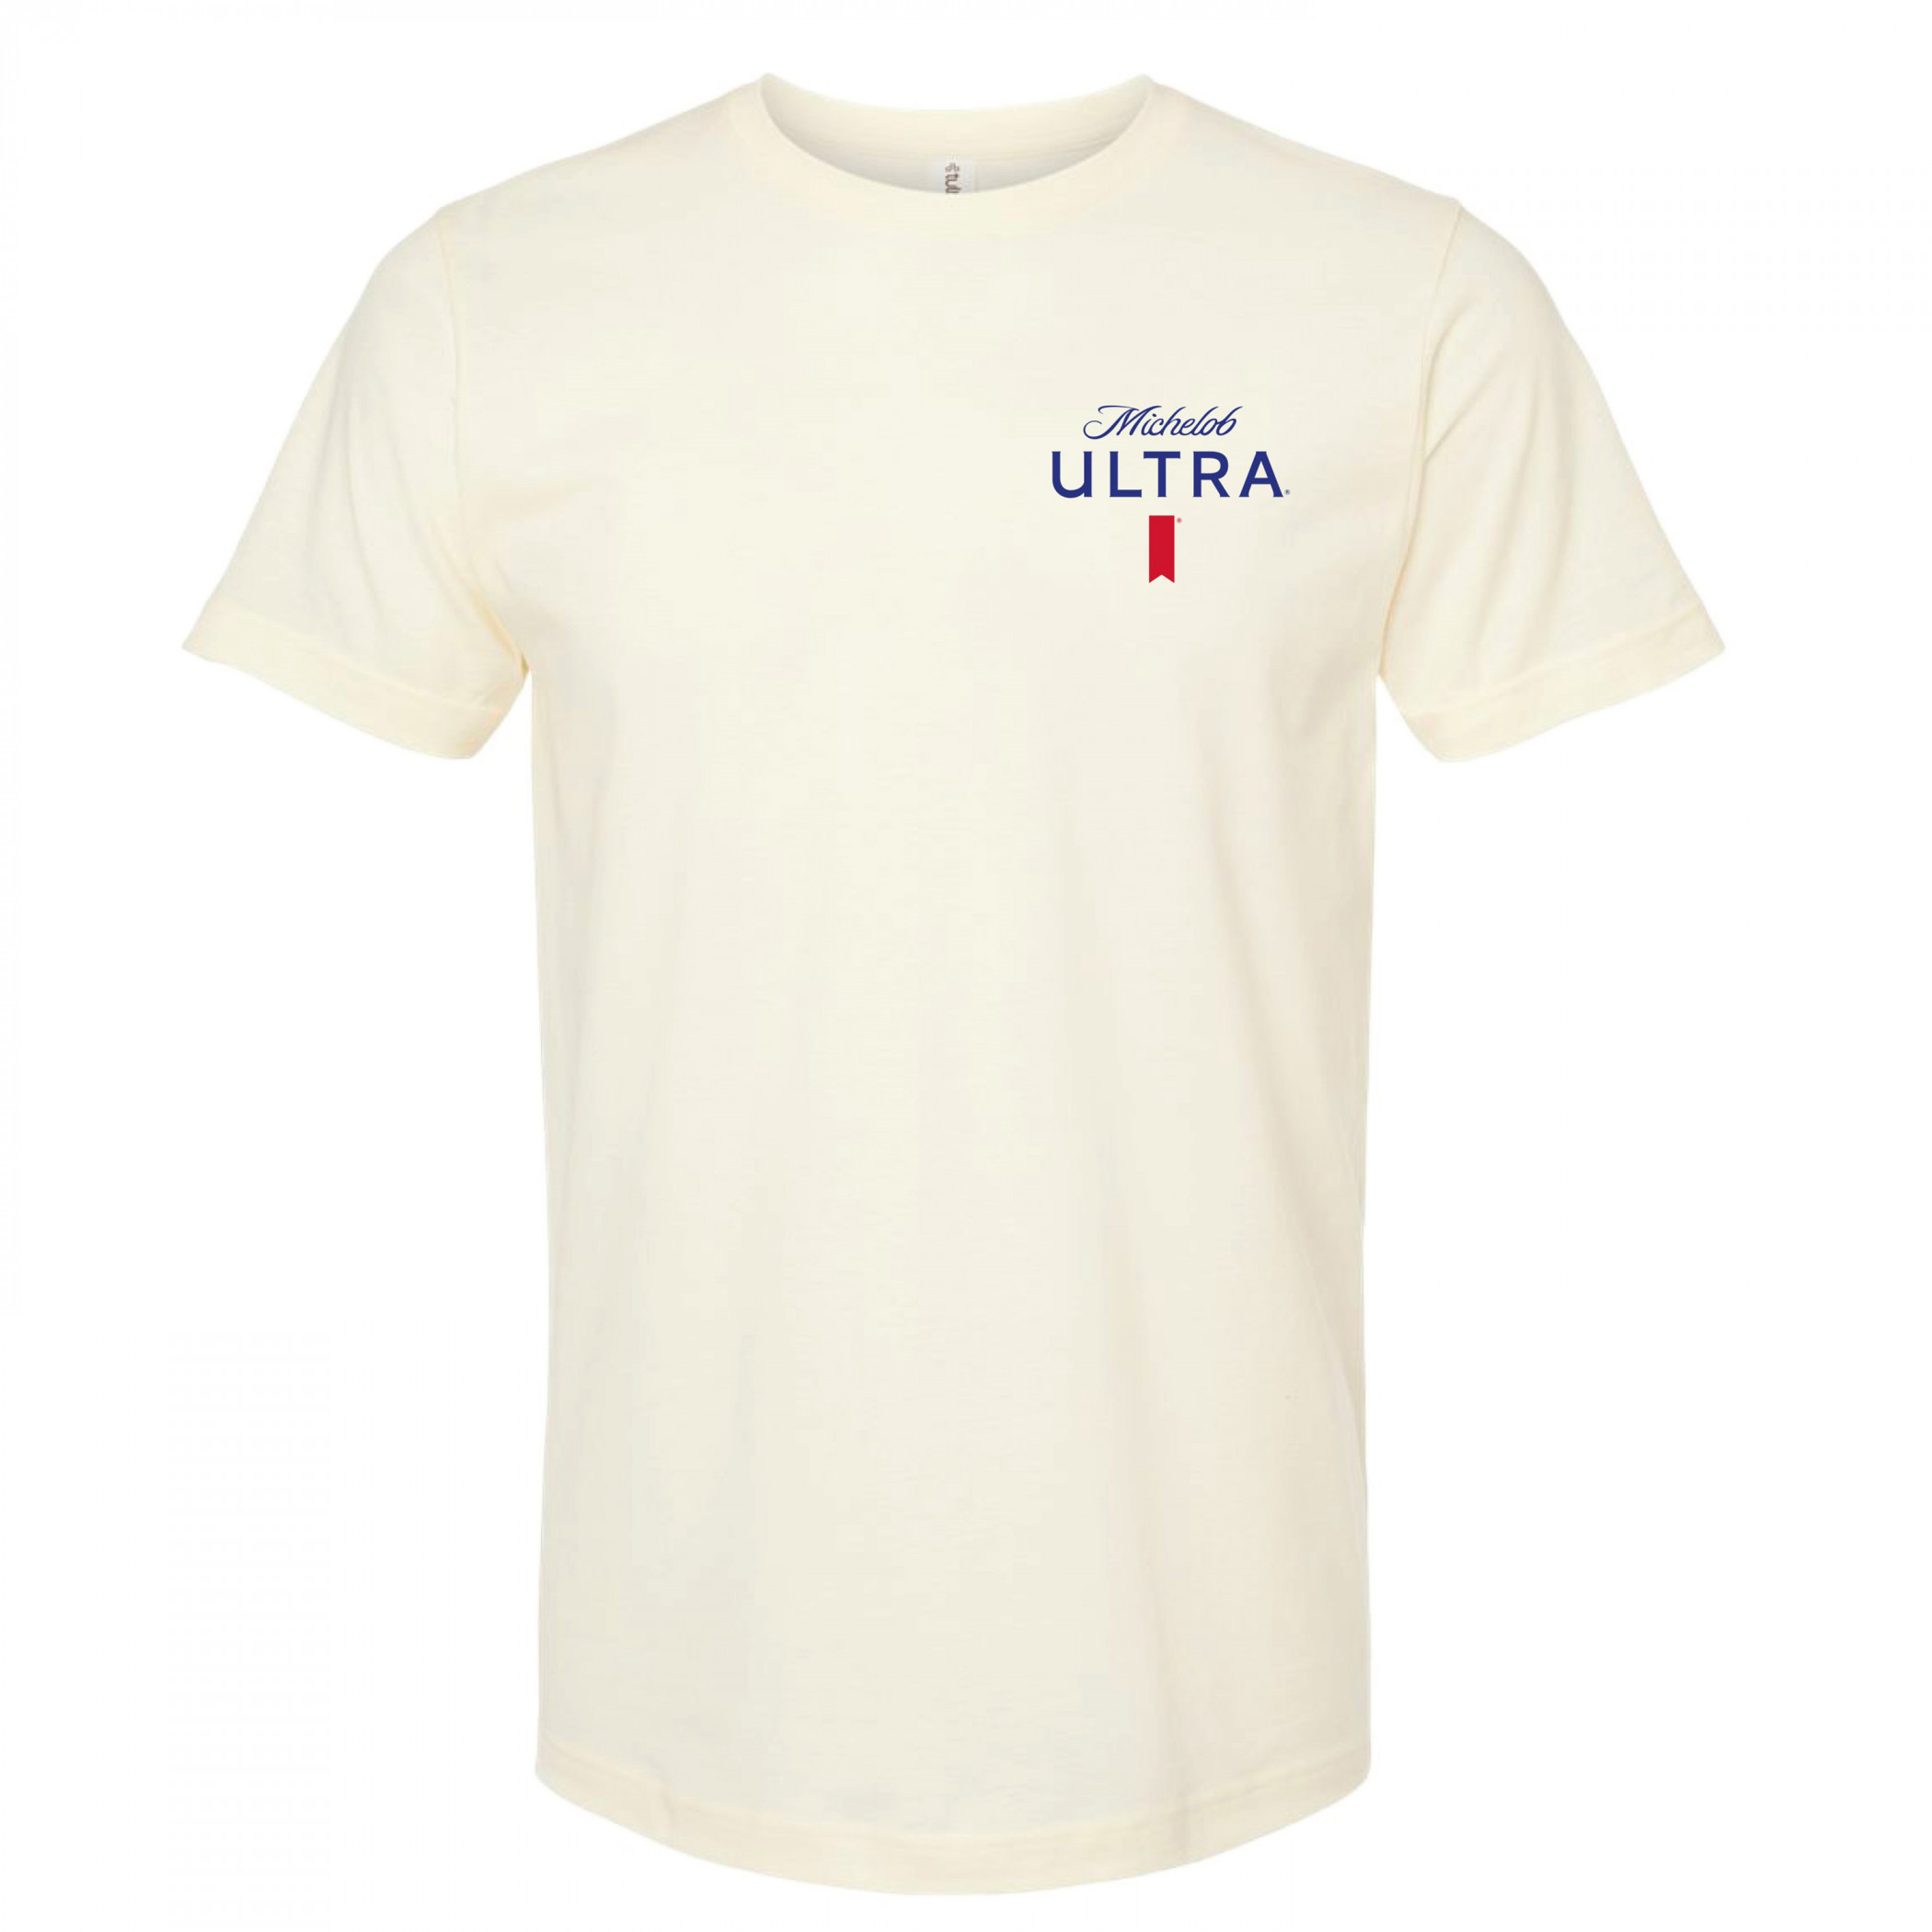 Michelob Ultra Pickleball Sport Club Front and Back Print T-Shirt